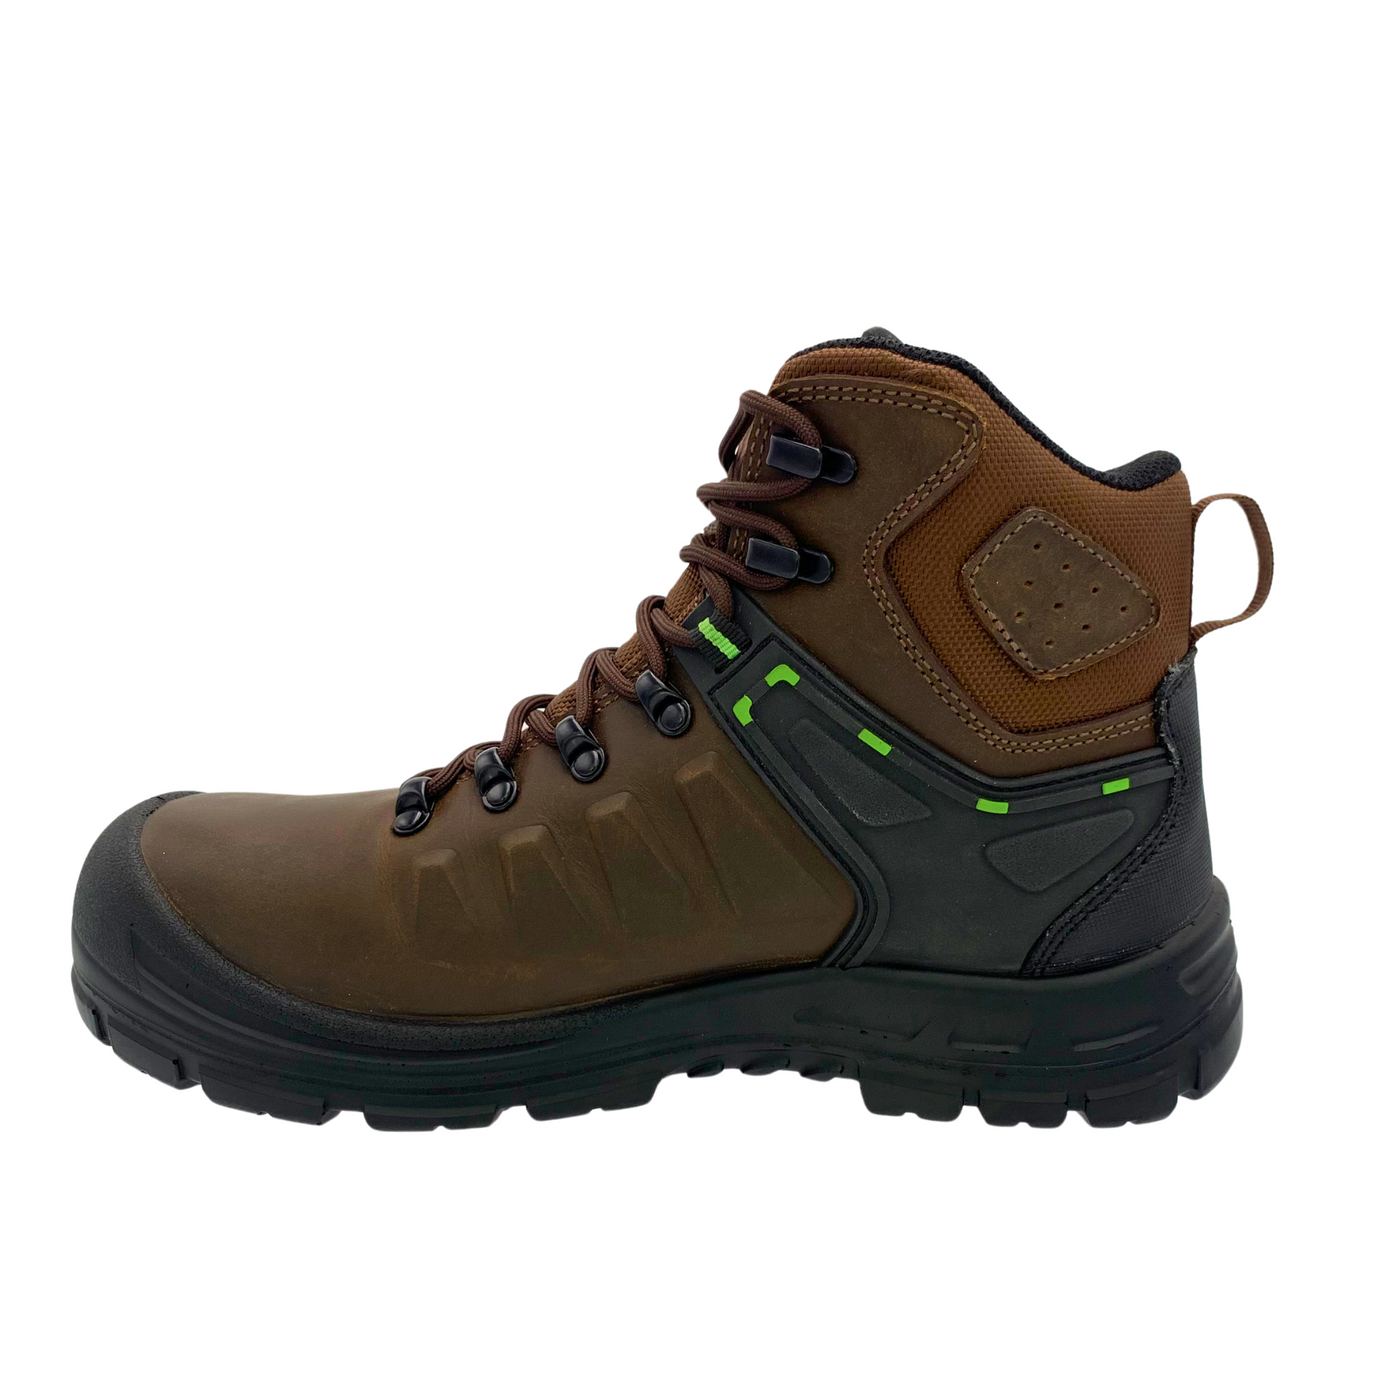 Men's 6" Brown waterproof composite safety toe leather work boot-9108